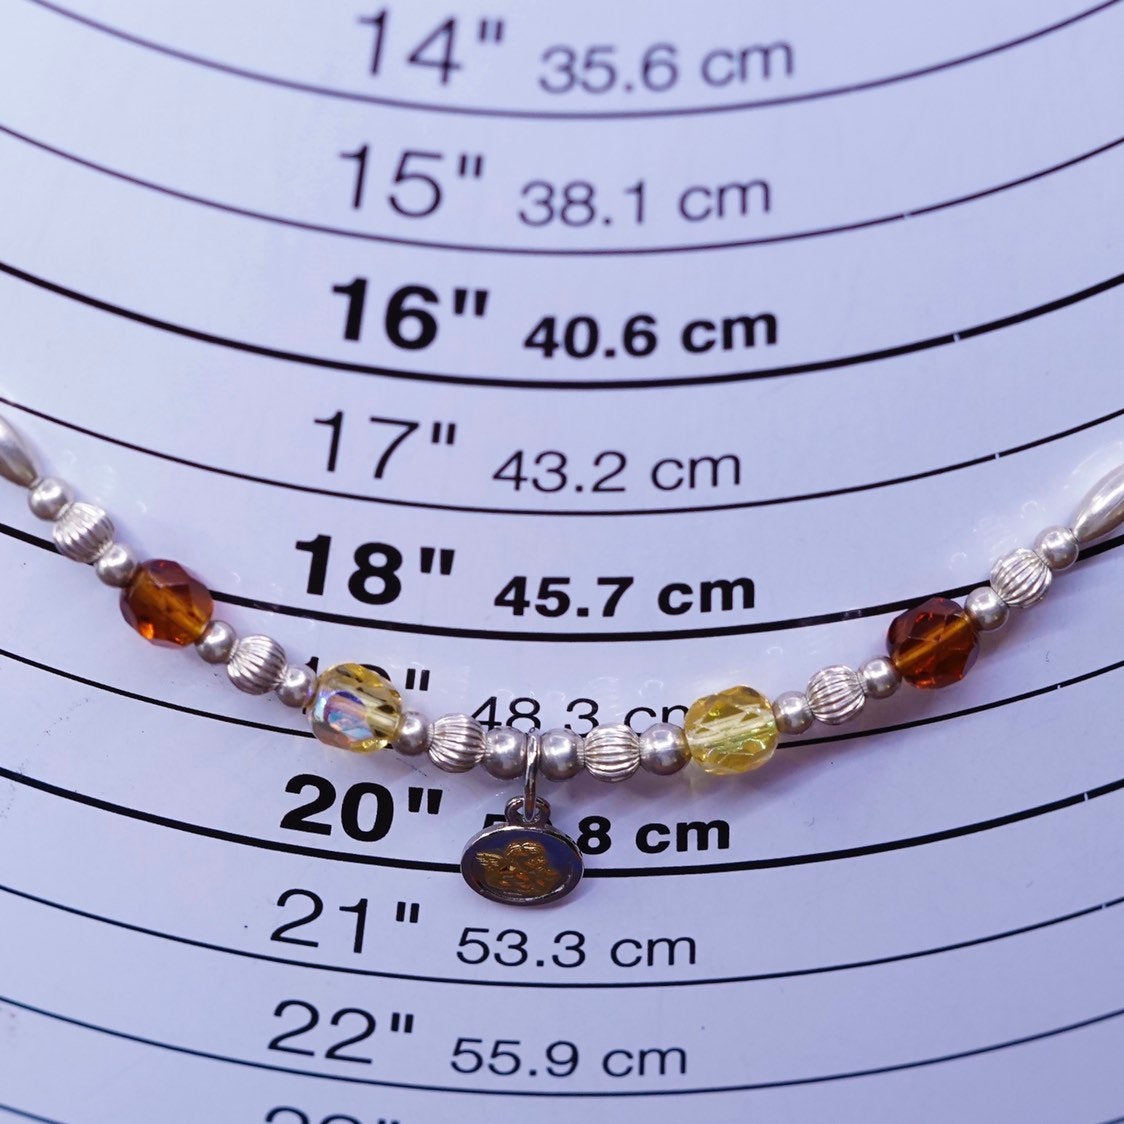 16”, Sterling silver necklace, 925 liquid chain w/ amber beads N angle pendant